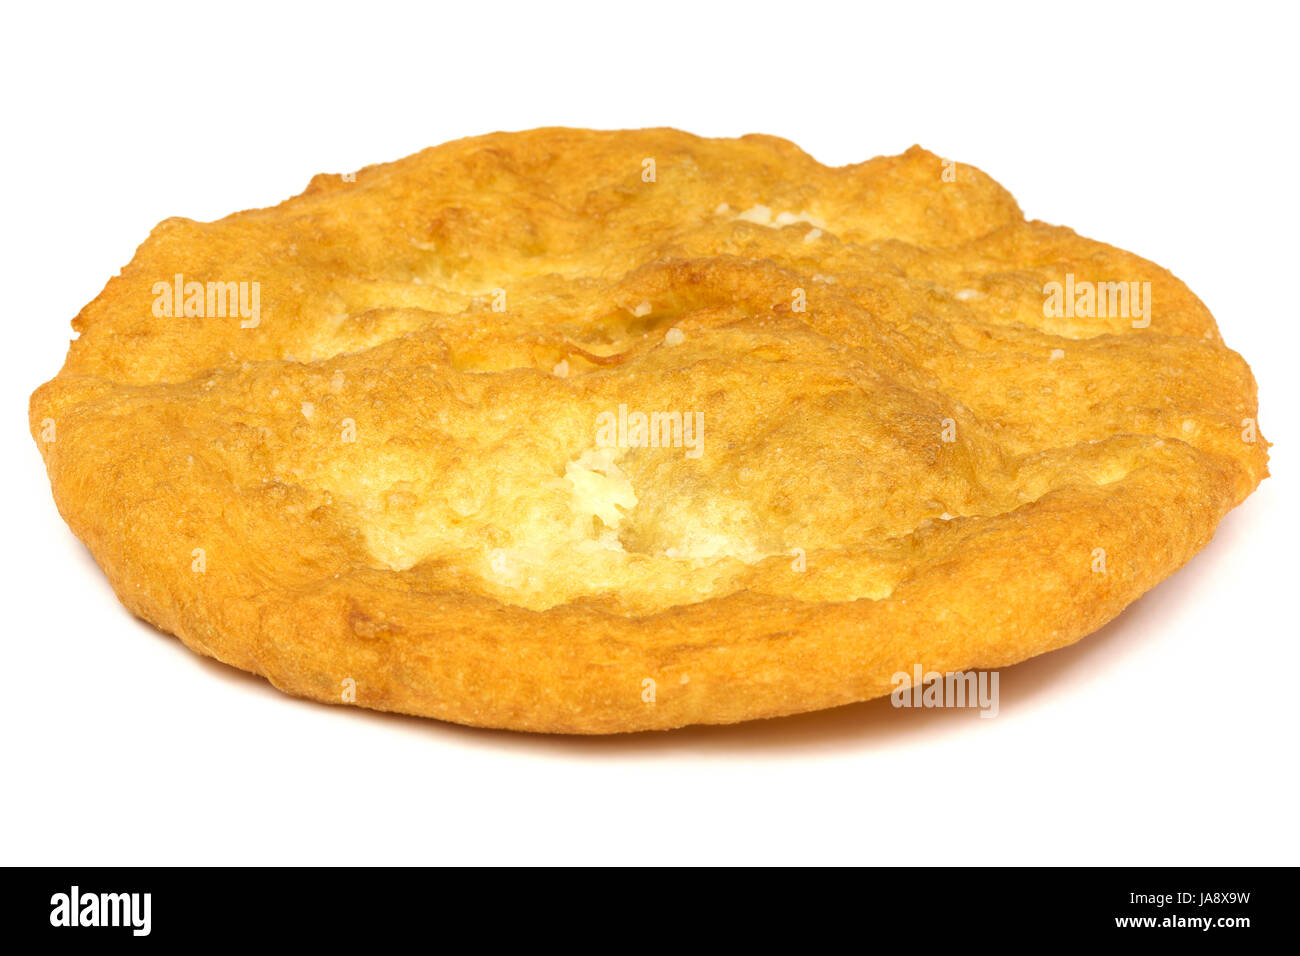 fastfood, snack, bread, food, dish, meal, fastfood, dough, flan, leavened Stock Photo